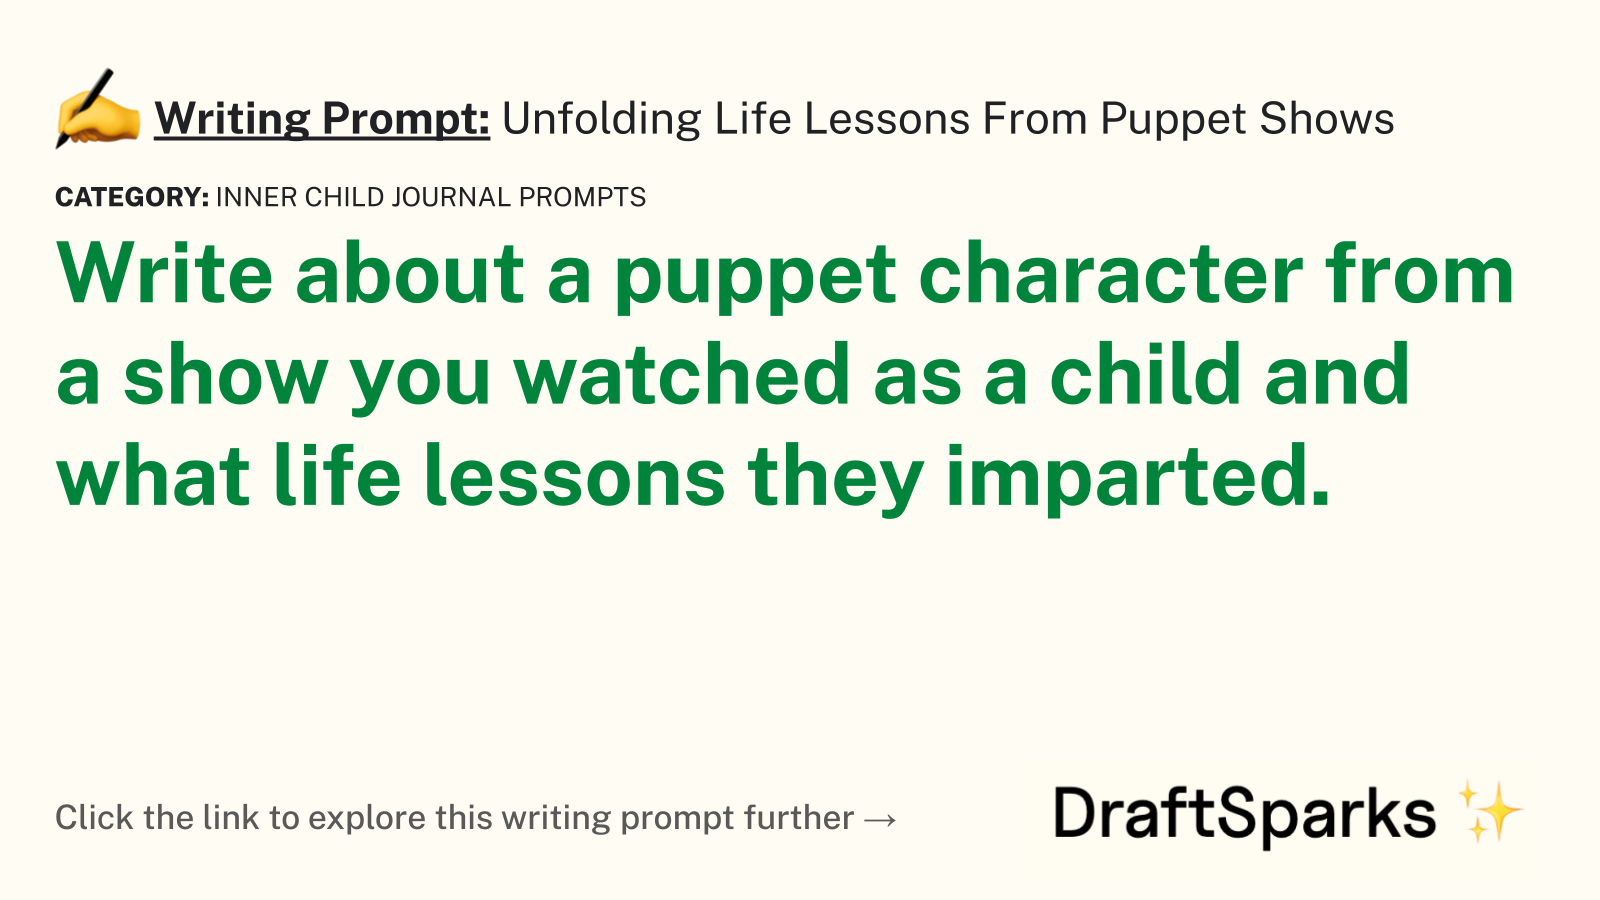 Unfolding Life Lessons From Puppet Shows